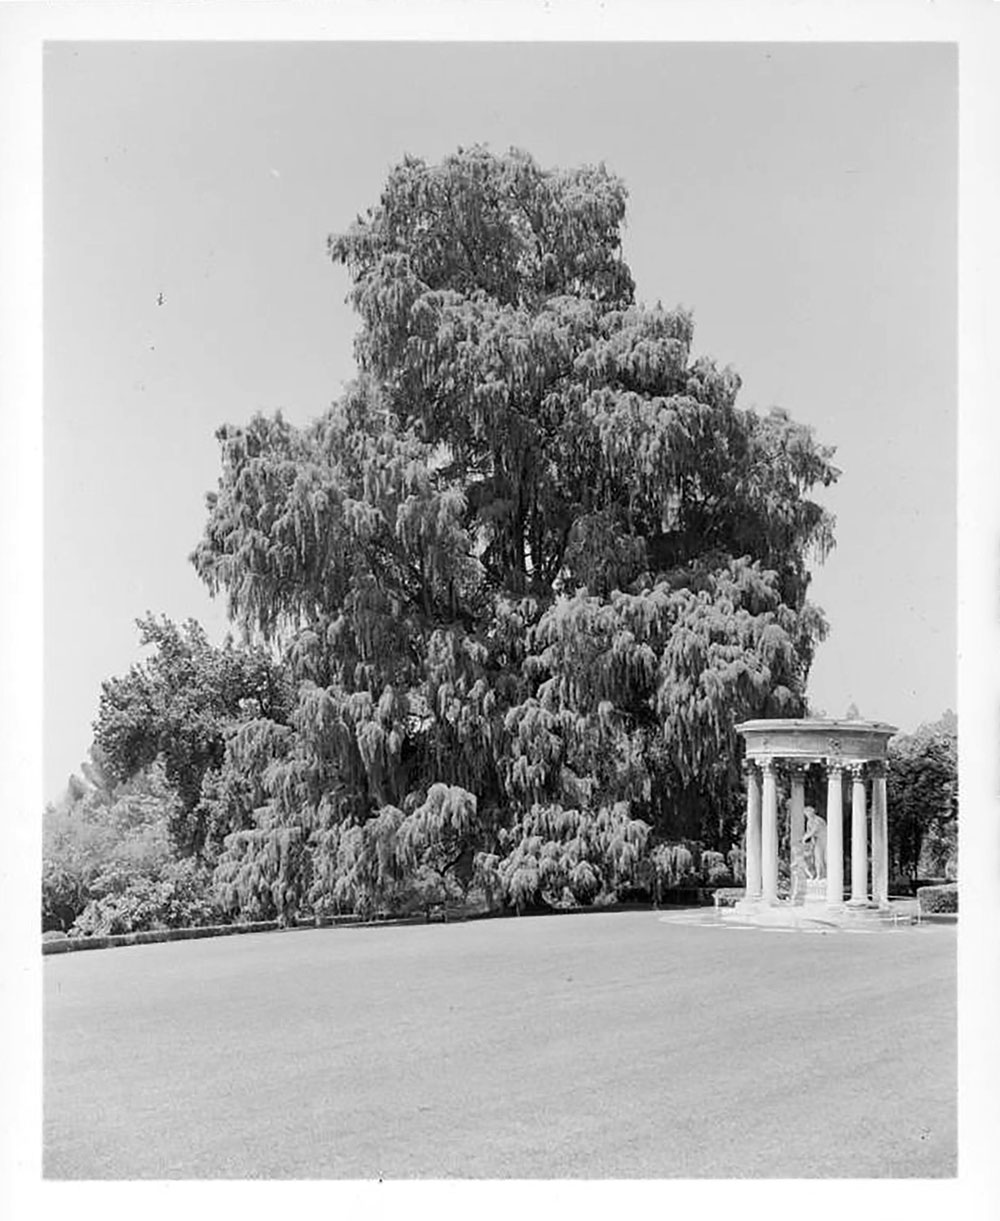 A black and white photo of large tree growing over a lawn.